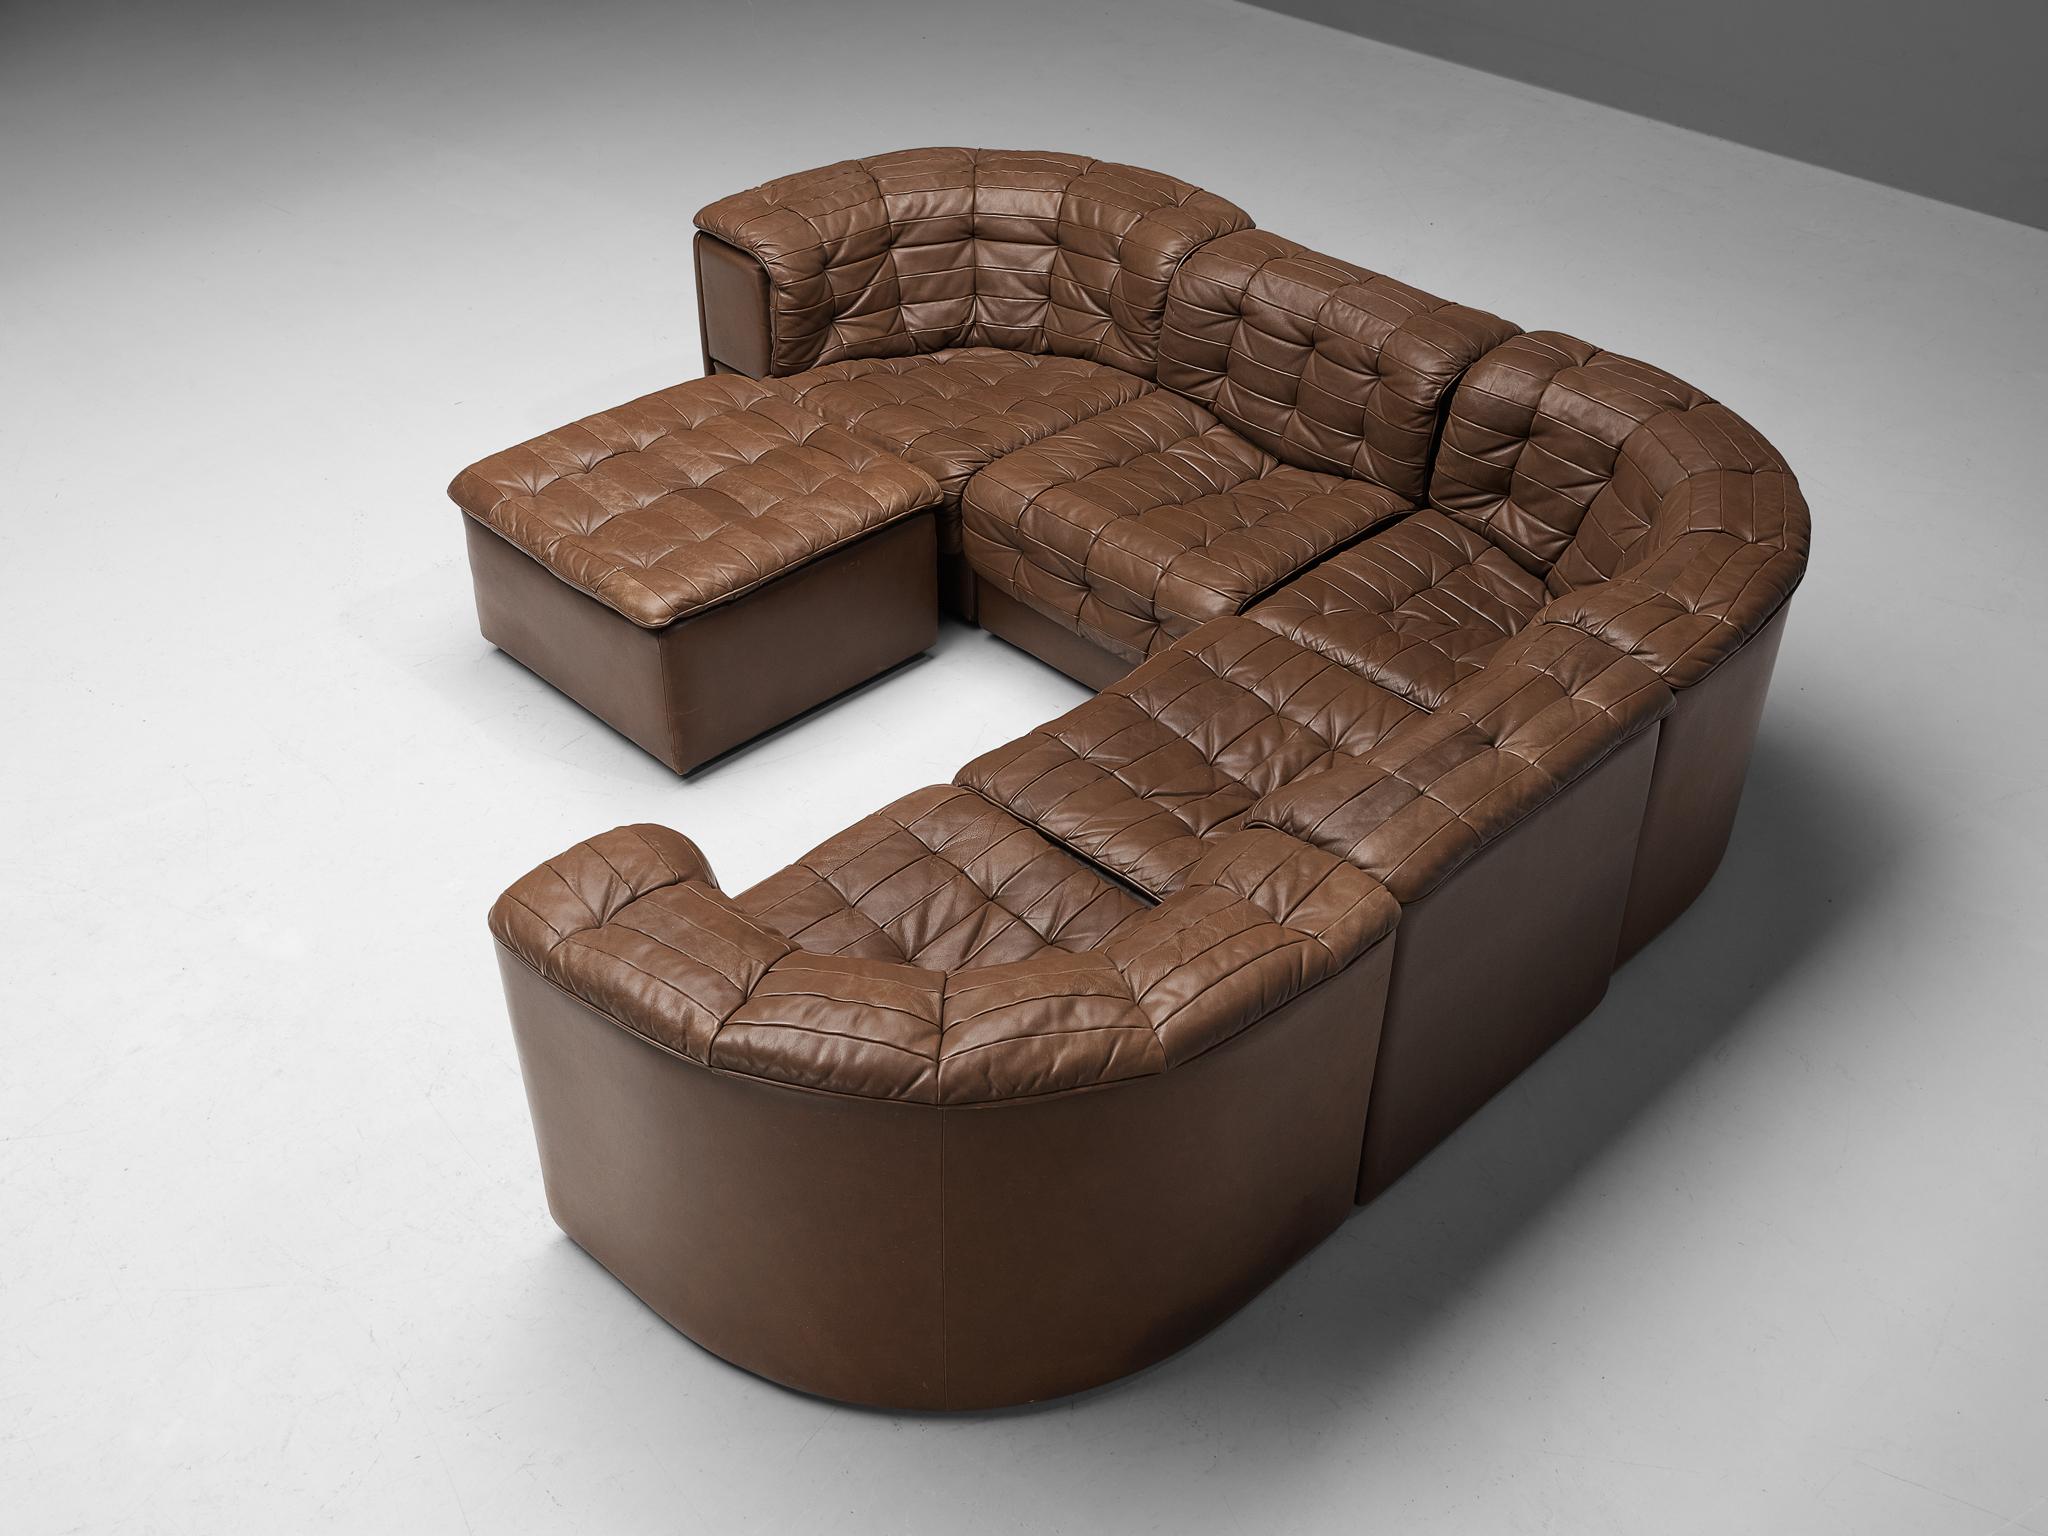 De Sede, 'DS-11' sectional sofa and ottoman, leather, Switzerland, 1970s.

This high-quality sectional sofa designed by De Sede in the 1970s contains two regular elements, three corner elements, and an ottoman, making it possible to arrange this